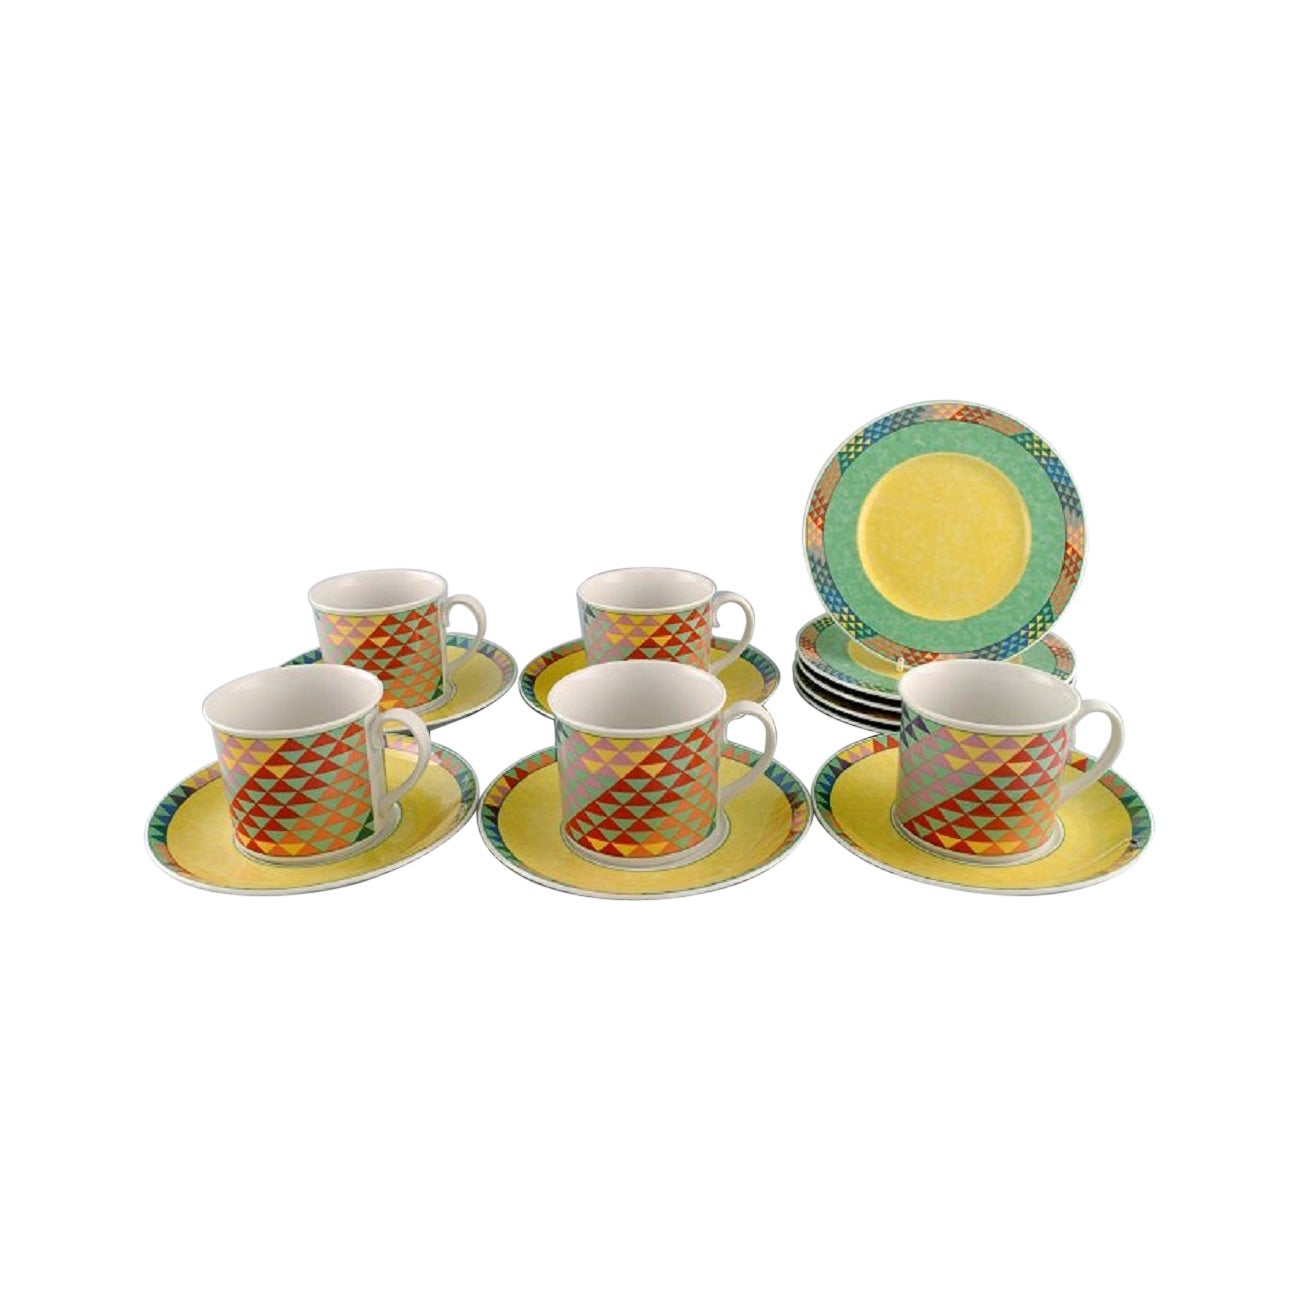 Gallo Design, Germany, Pamplona Coffee Service for Five People For Sale